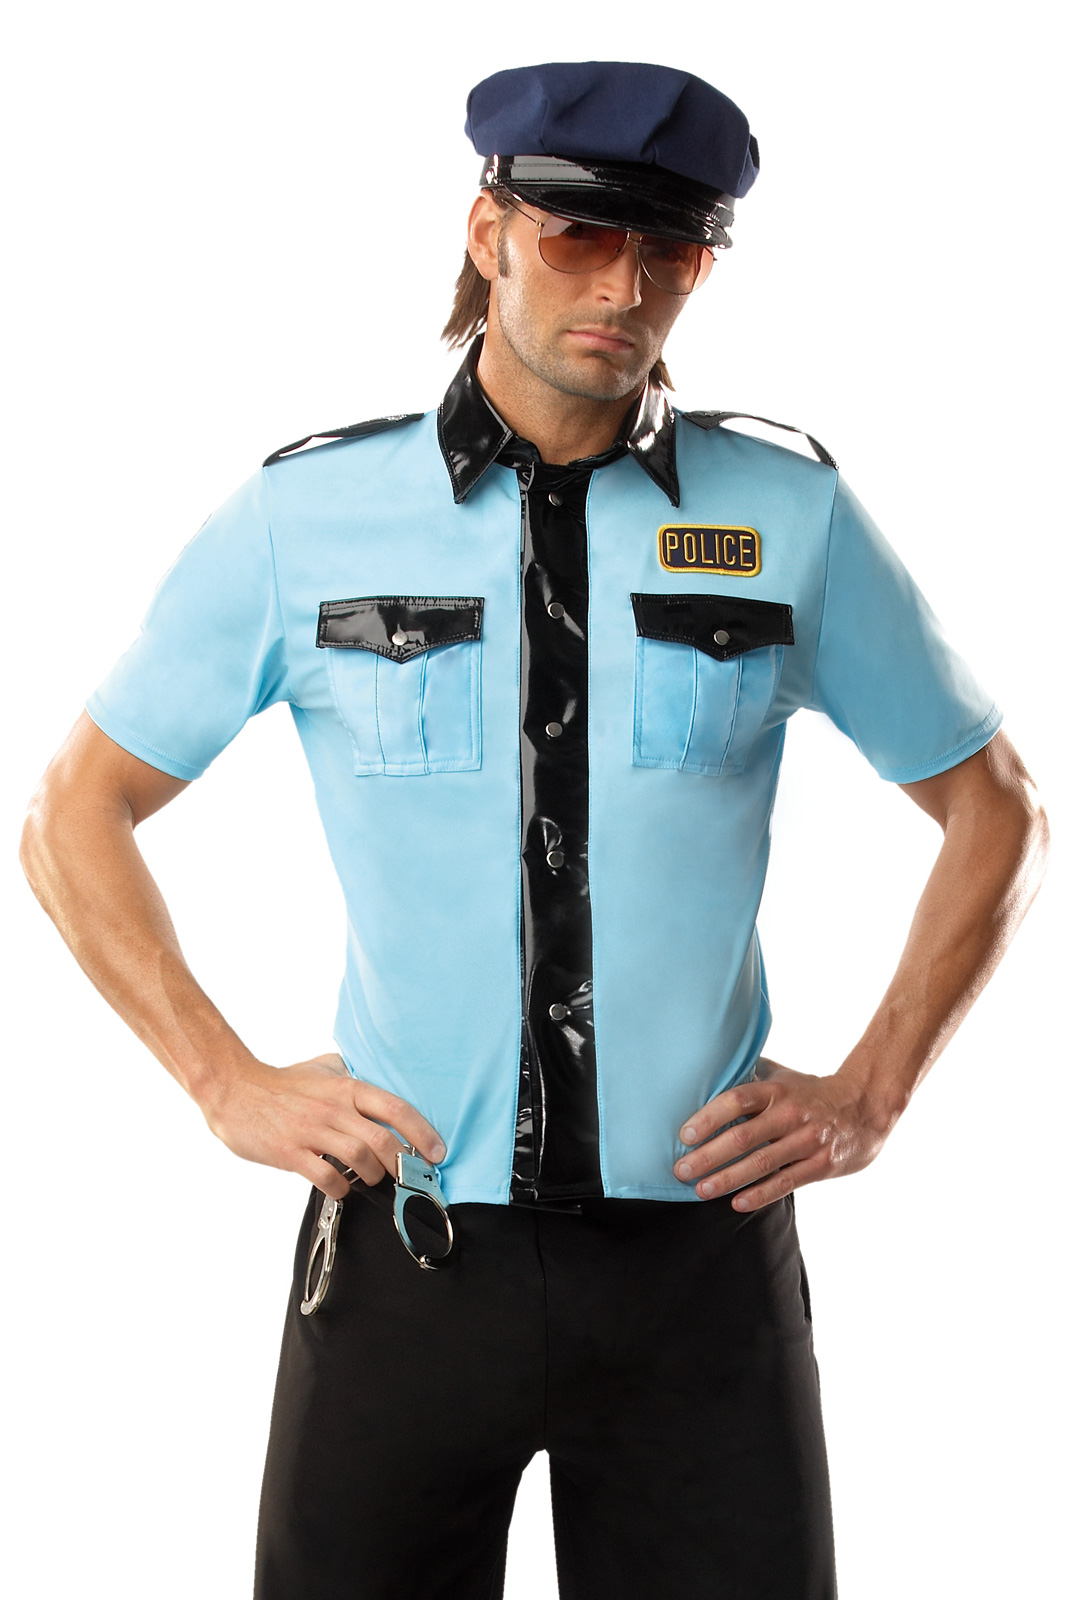 Coquette Men's Police Man Adult Costume - Large/XLarge